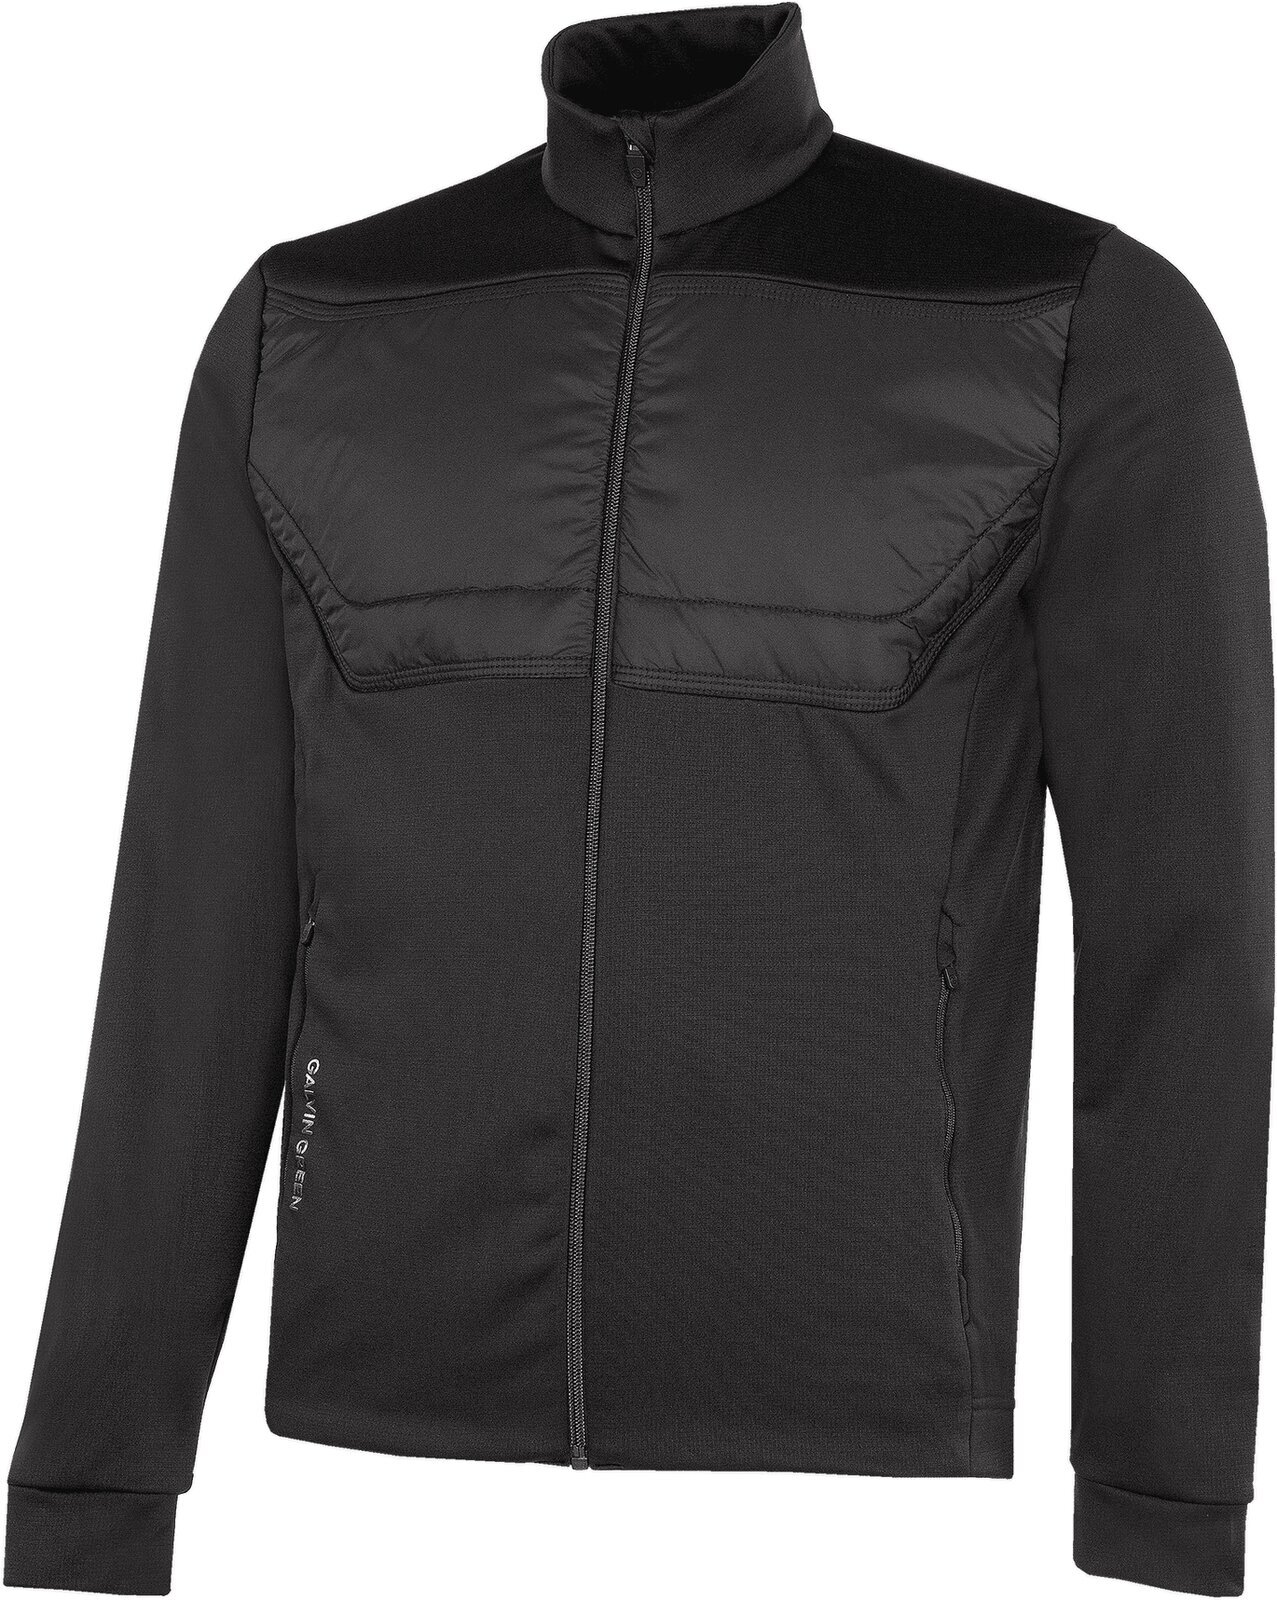 Jacket Galvin Green Dylan Mens Insulating Mid Layer Black 3XL